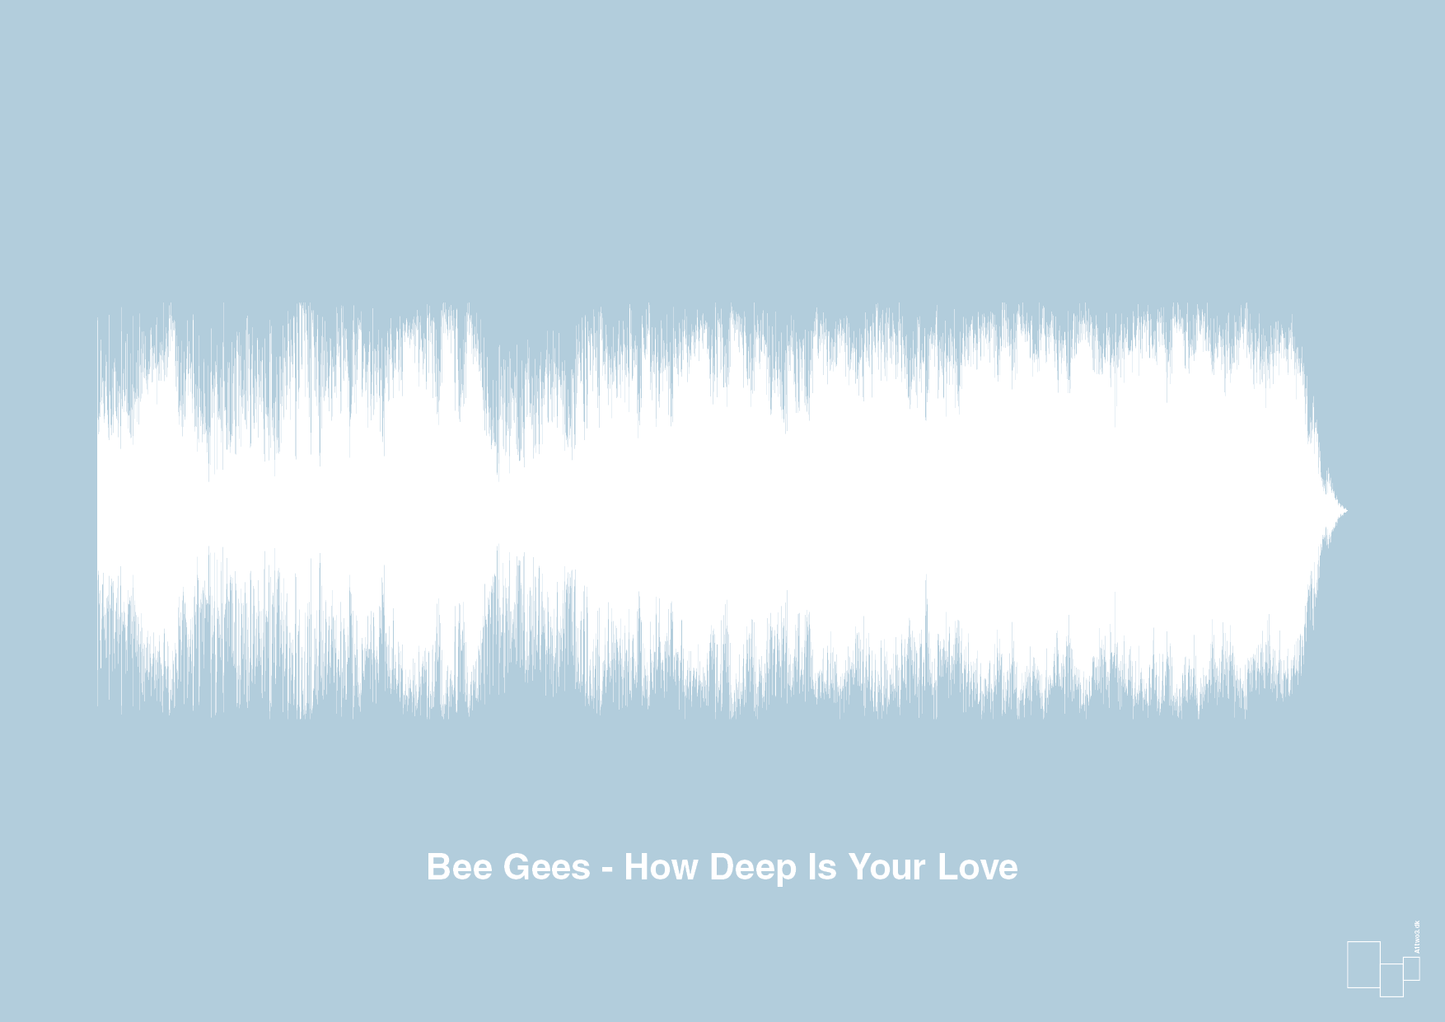 bee gees - how deep is your love - Plakat med Musik i Heavenly Blue